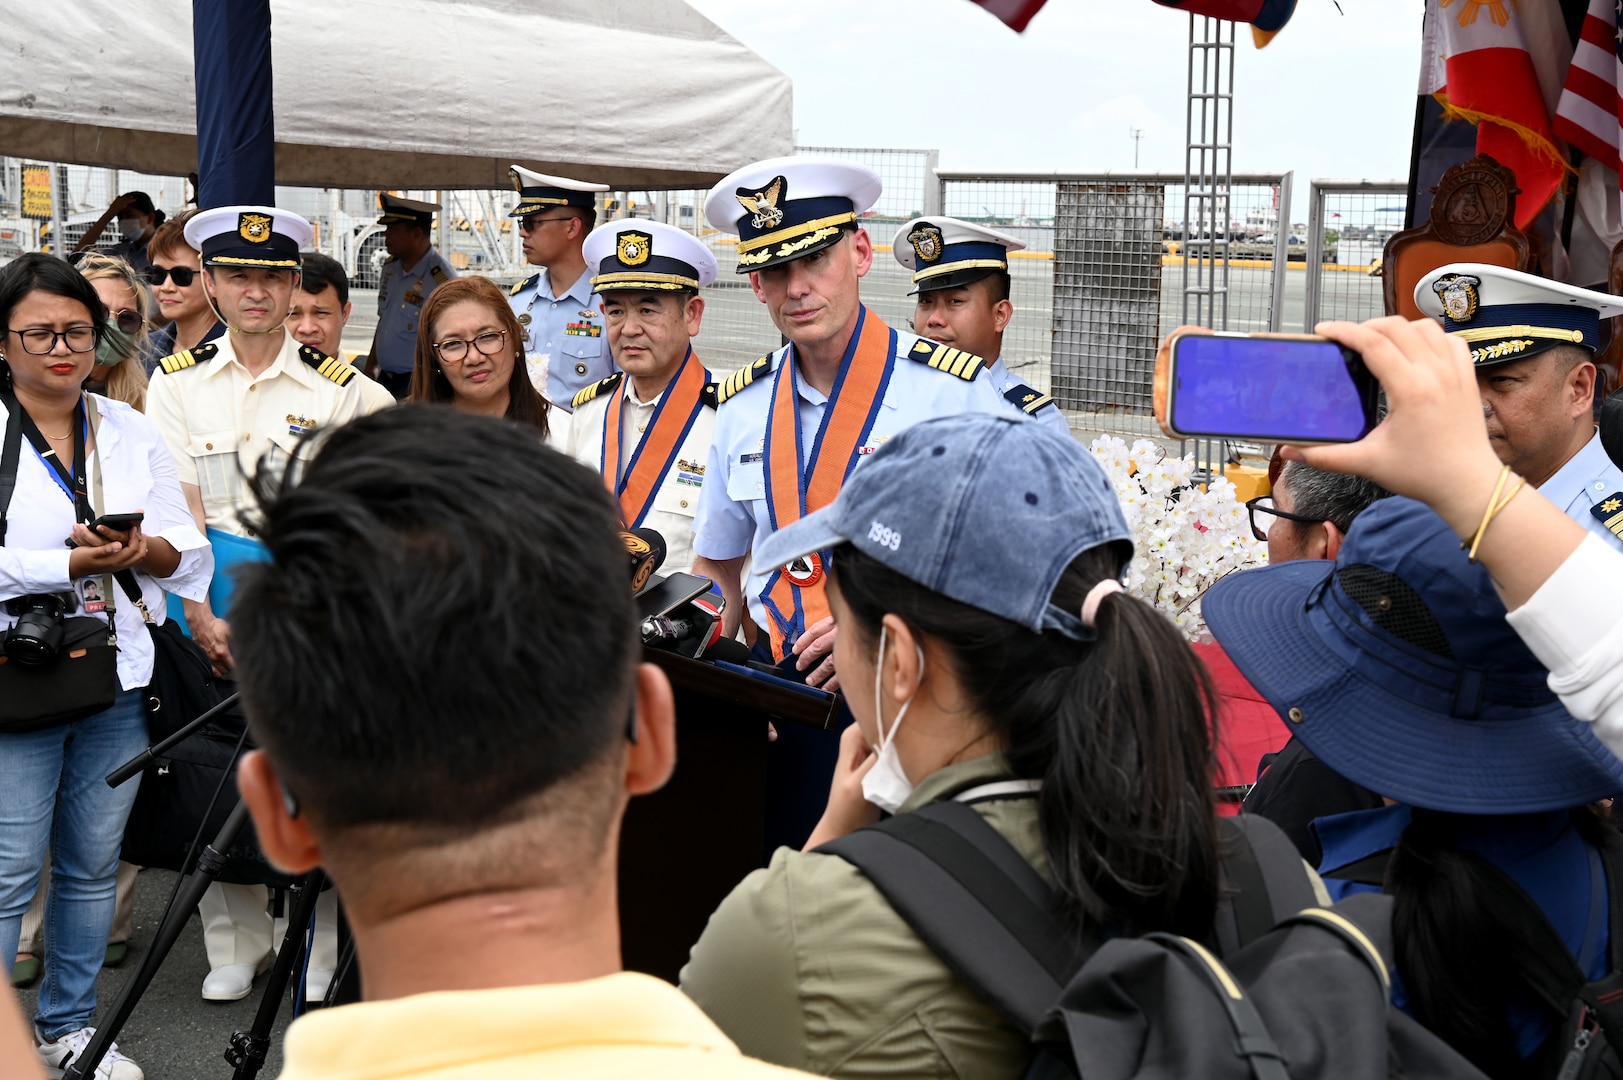 Capt. Brian Krautler, commanding officer of U.S. Coast Guard Cutter Stratton (WMSL 752), answers questions from the media following Stratton’s arrival to Manila, Philippines, for a tri-lateral engagement with the Philippine and Japan Coast Guards, June 1, 2023. Stratton deployed to the Western Pacific under U.S. Navy 7th Fleet command to serve as a non-escalatory asset for the promotion of a rules-based order in the maritime domain by engaging with partner nations and allies in the region. (U.S. Coast Guard photo by Chief Petty Officer Matt Masaschi)